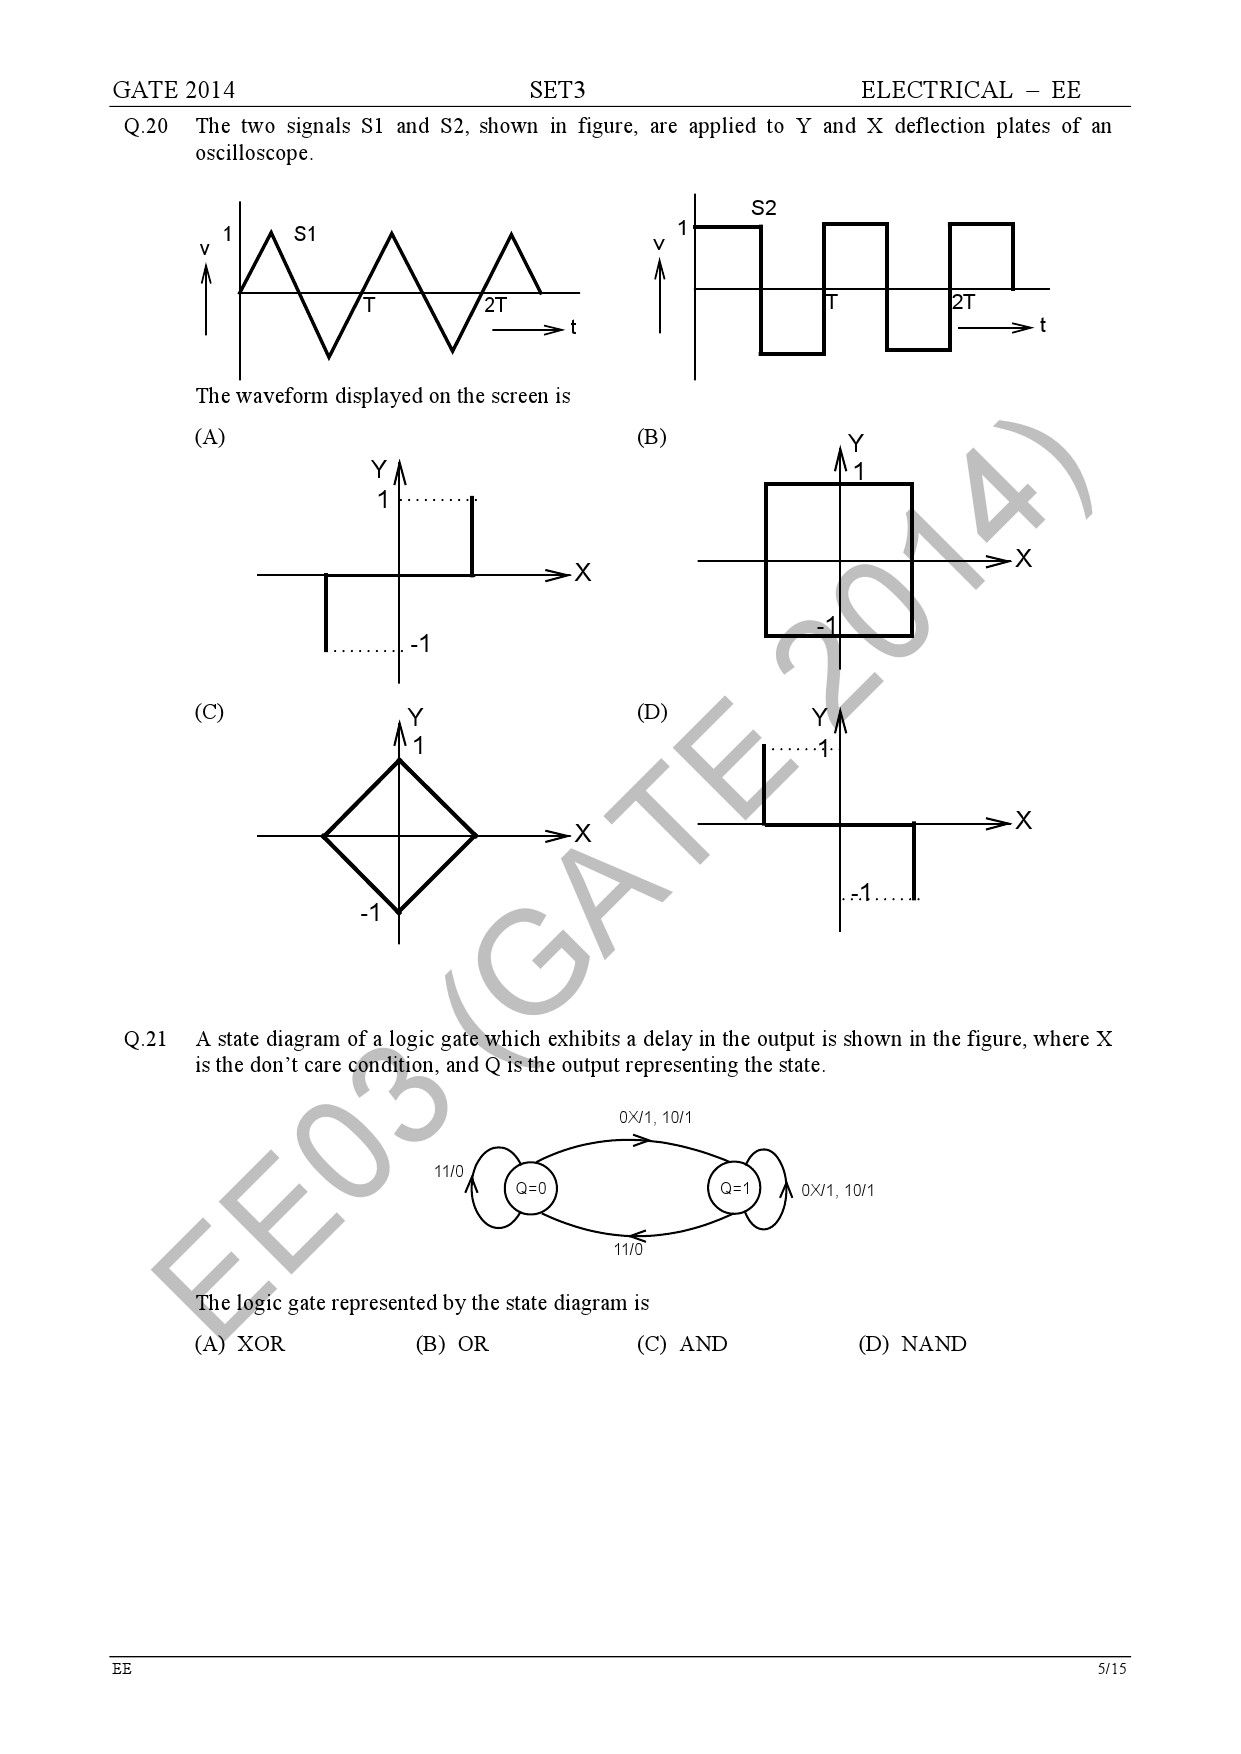 GATE Exam Question Paper 2014 Electrical Engineering Set 3 11